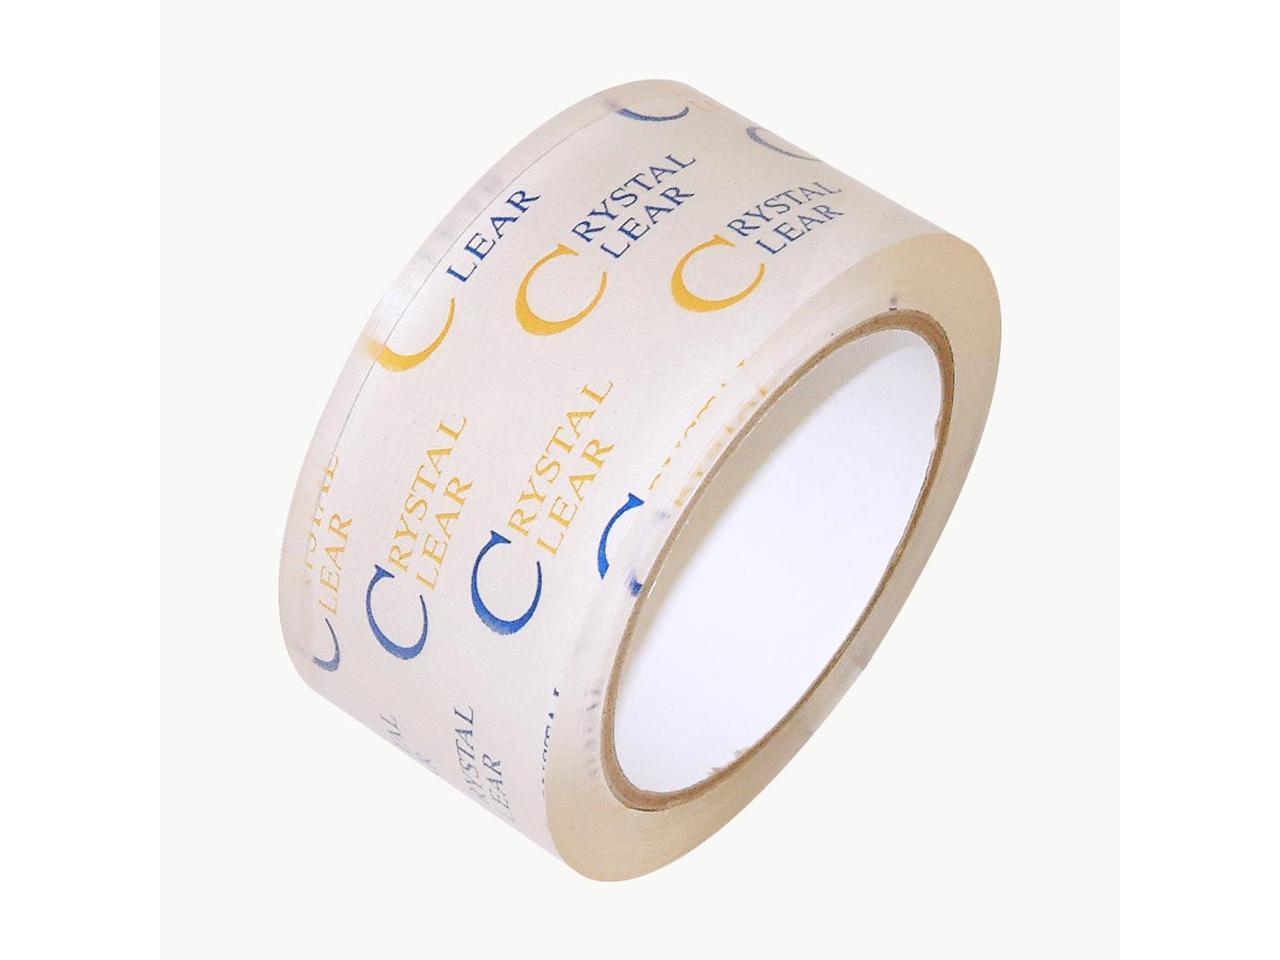 1 in JVCC CELLO-1 Cellophane Sealing Tape Clear x 72 yds. 